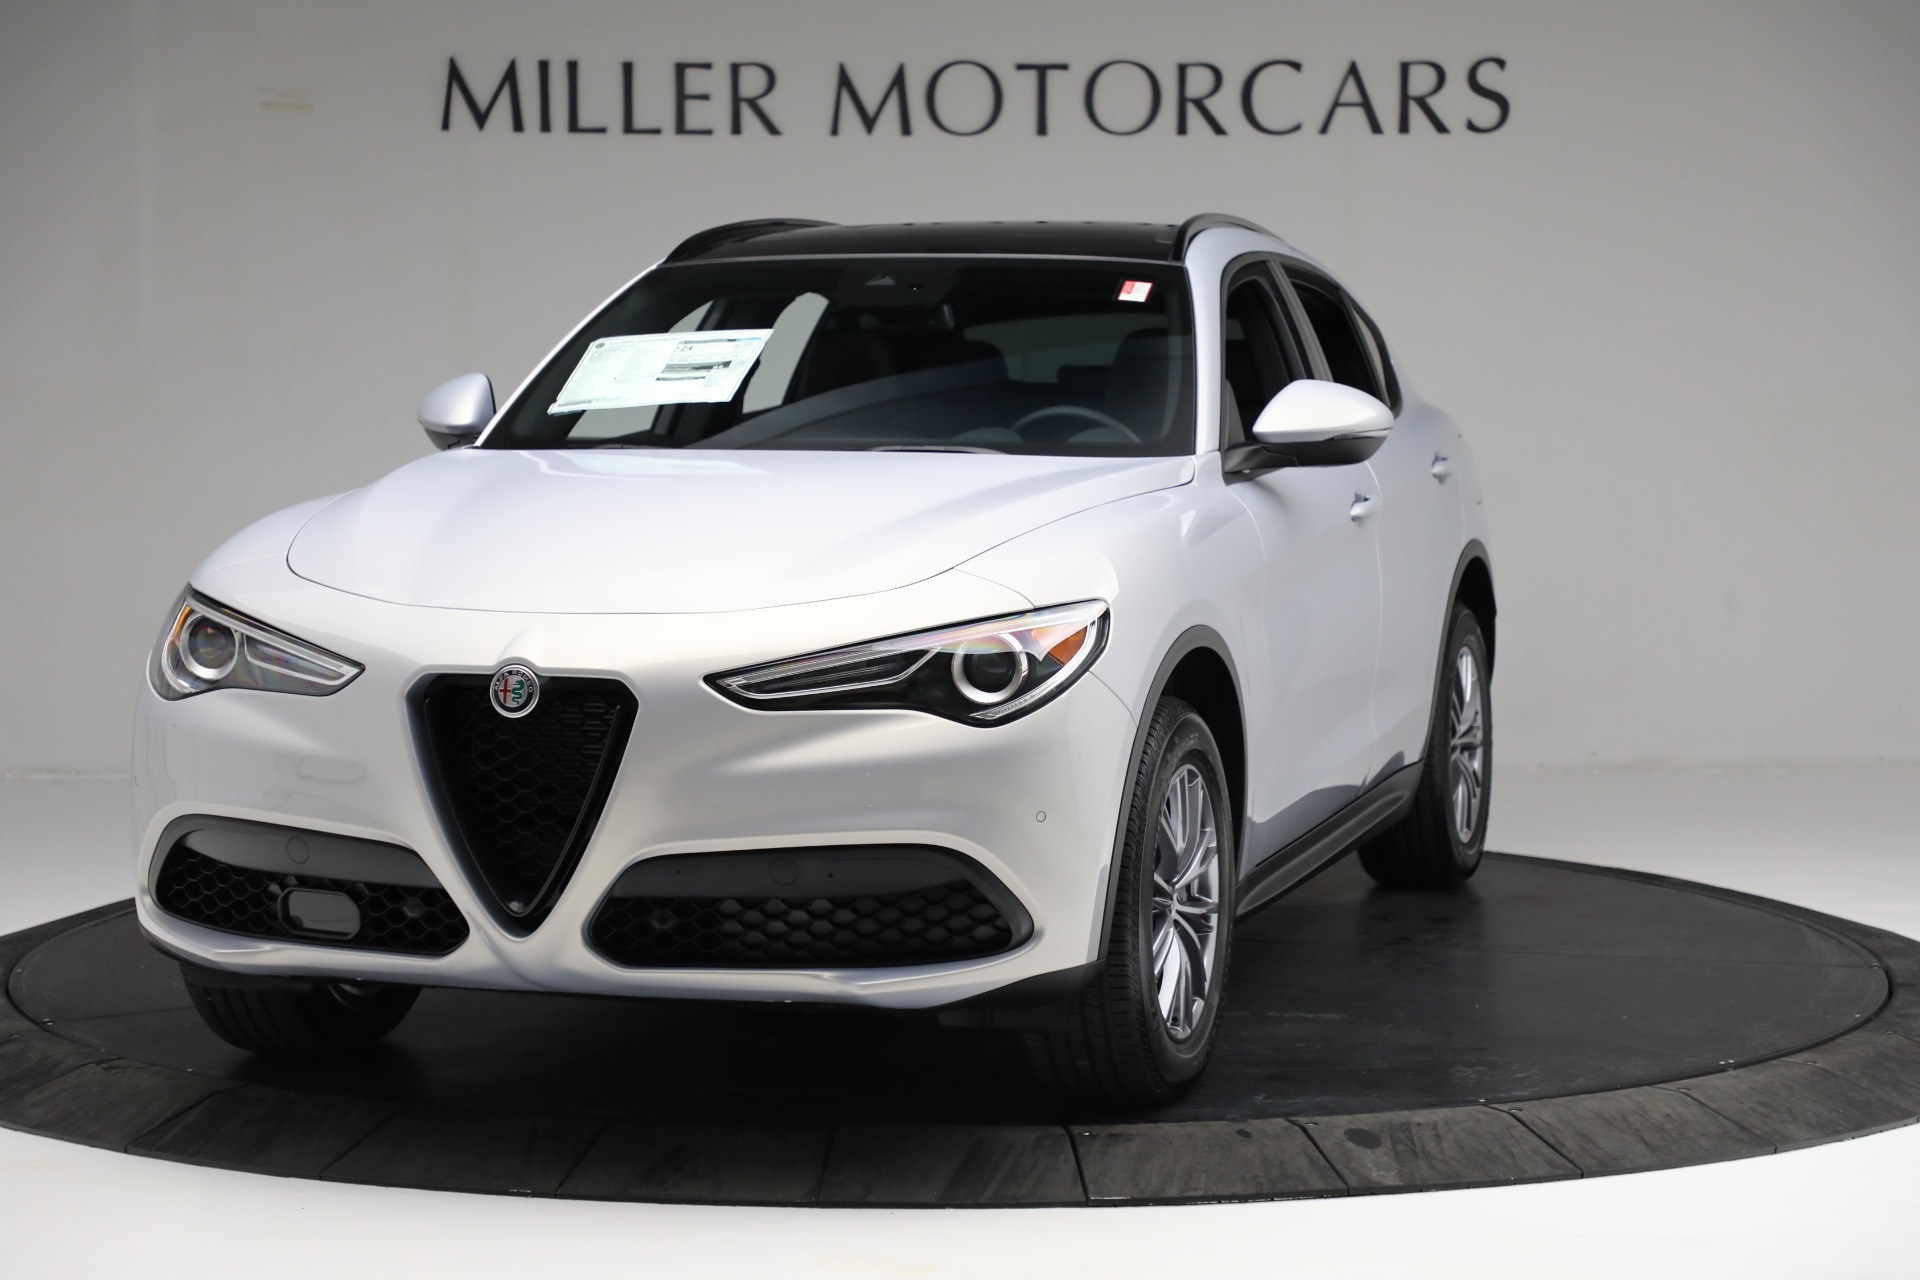 New 2022 Alfa Romeo Stelvio Sprint for sale Sold at Rolls-Royce Motor Cars Greenwich in Greenwich CT 06830 1